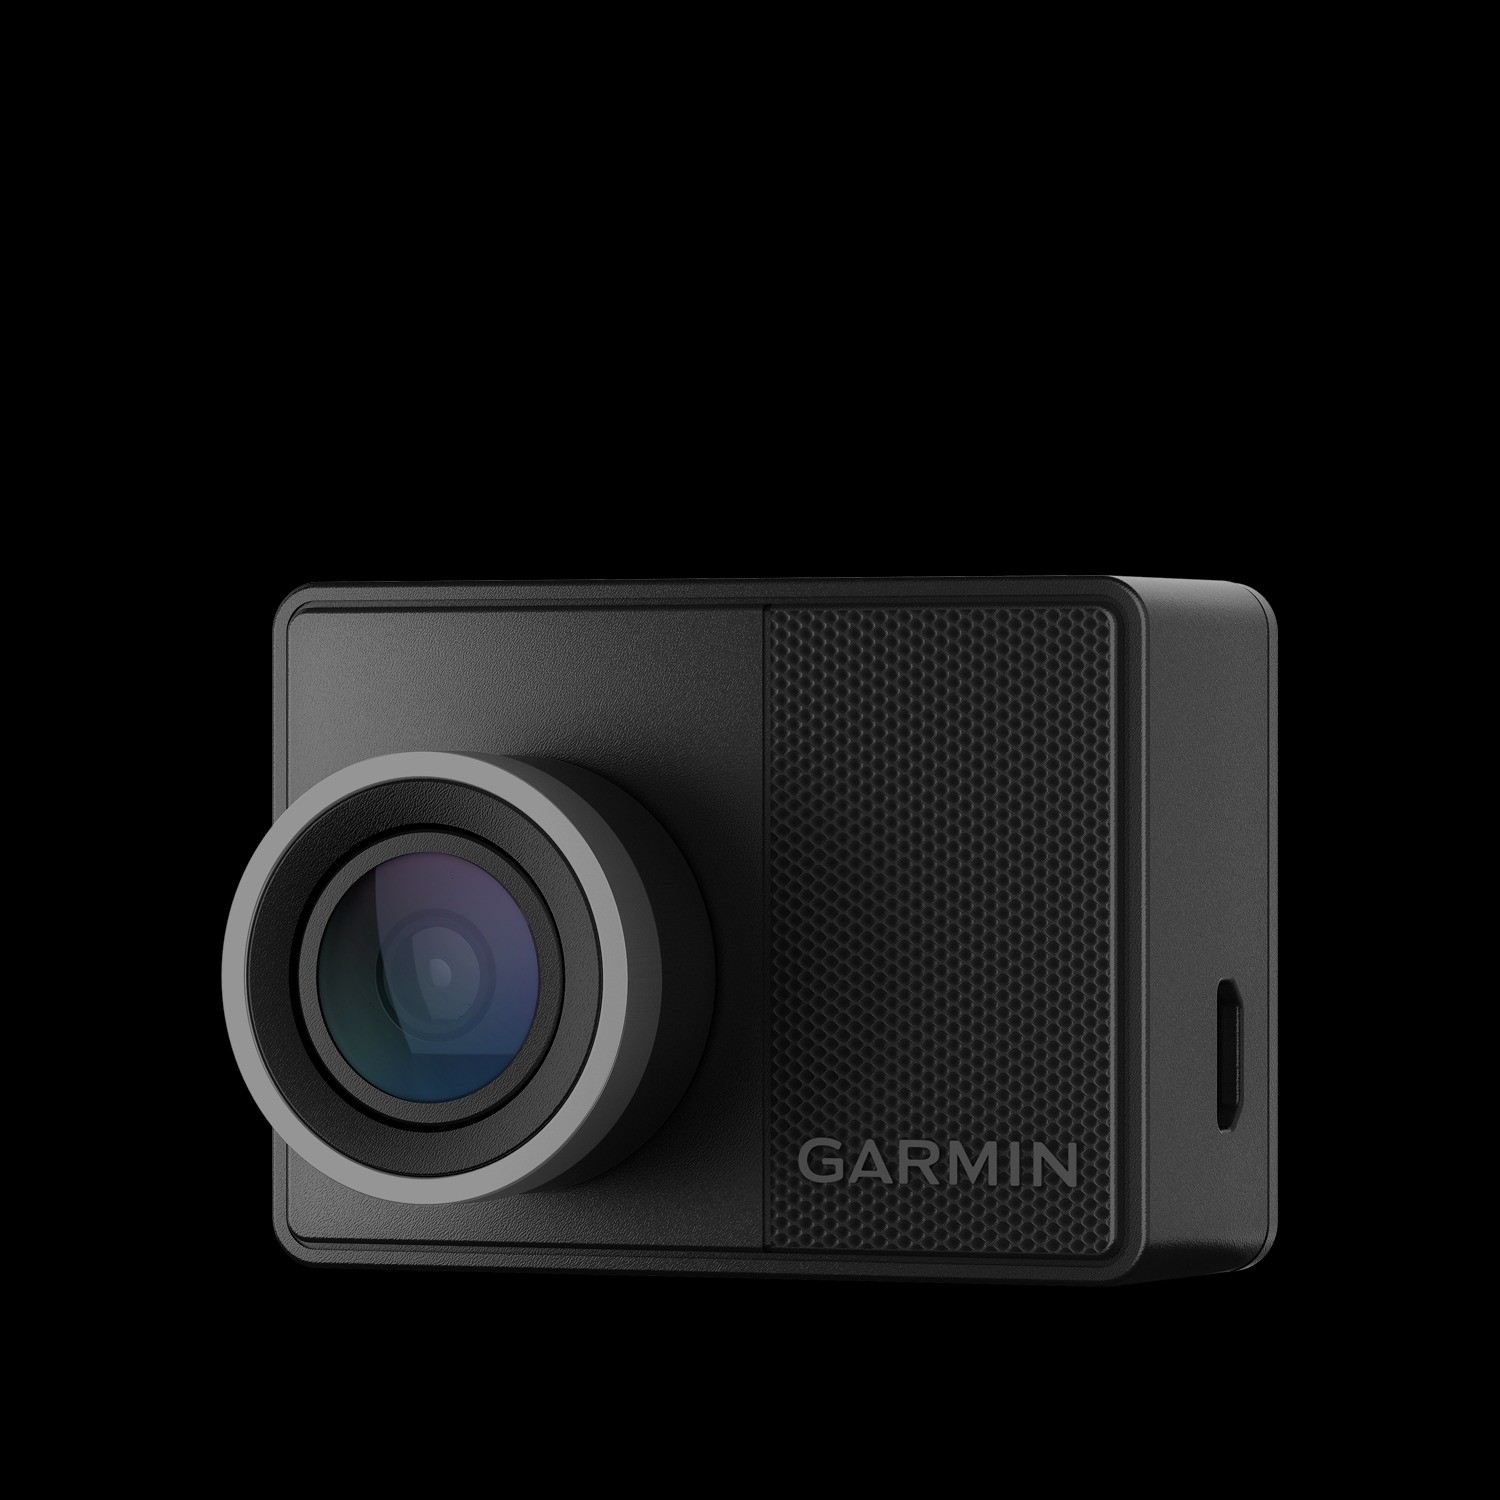 https://s1.cdn.autoevolution.com/images/news/gallery/garmin-launches-new-dash-cams-with-phone-notifications-and-voice-commands_1.jpg